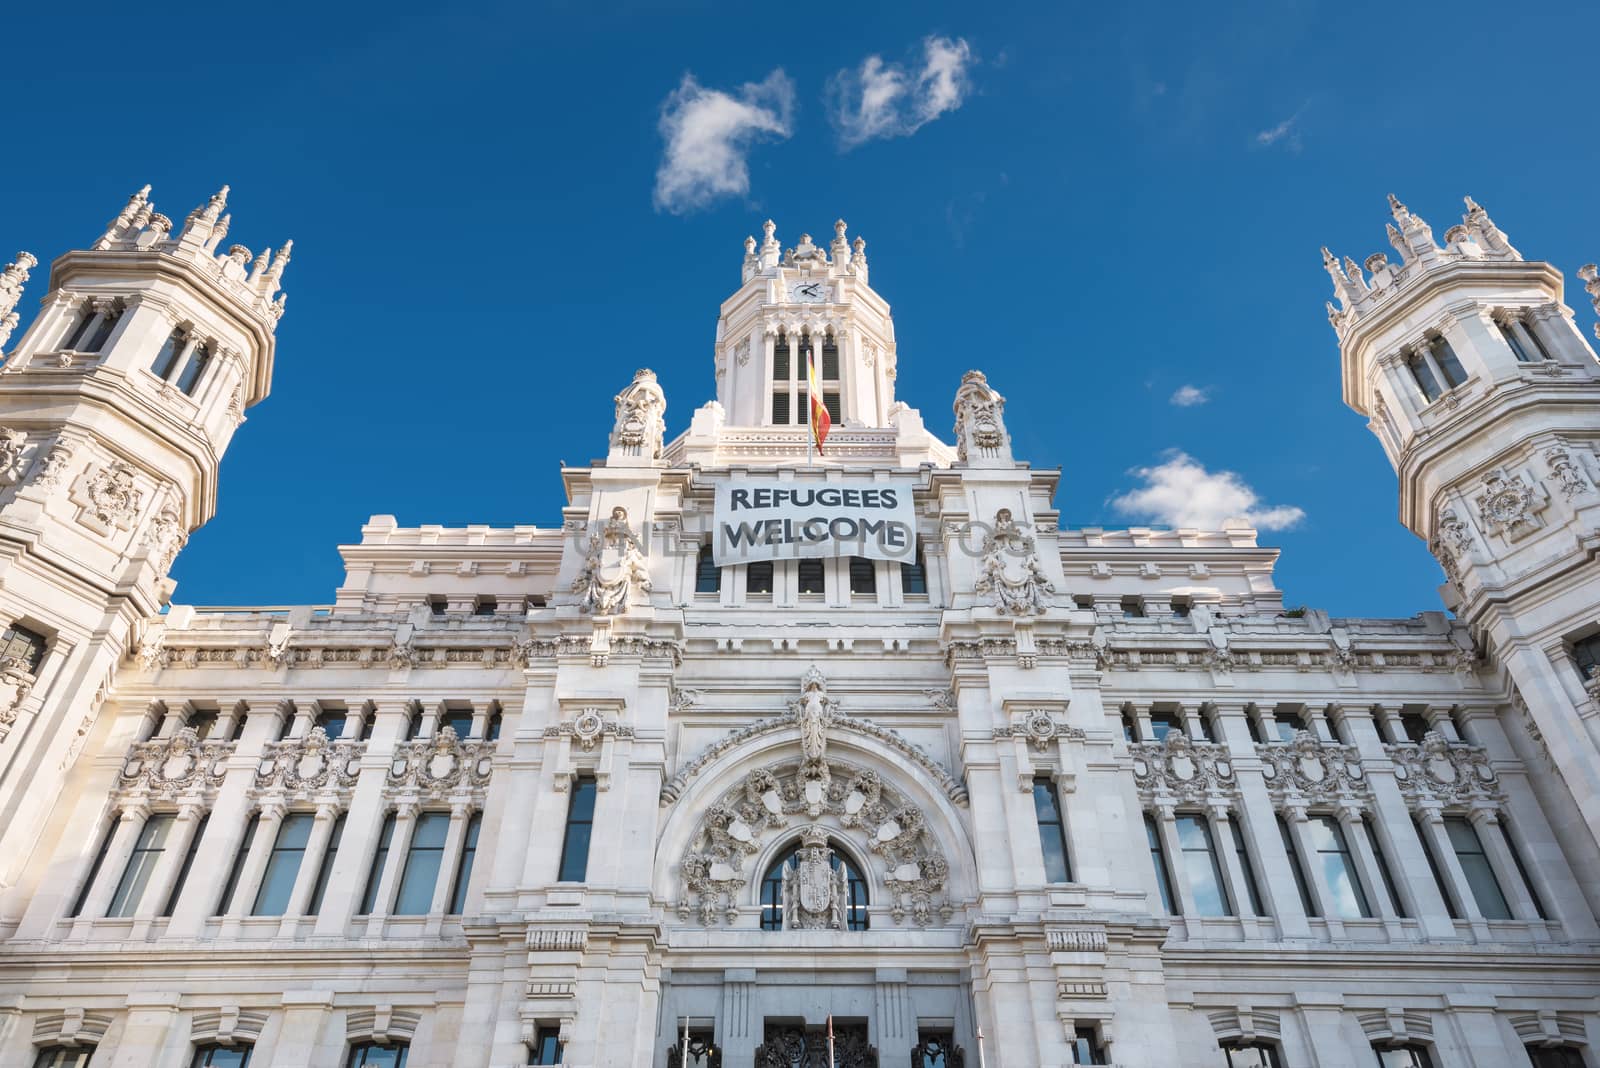 CybeleS Palace City Hall in Madrid, Spain. by HERRAEZ